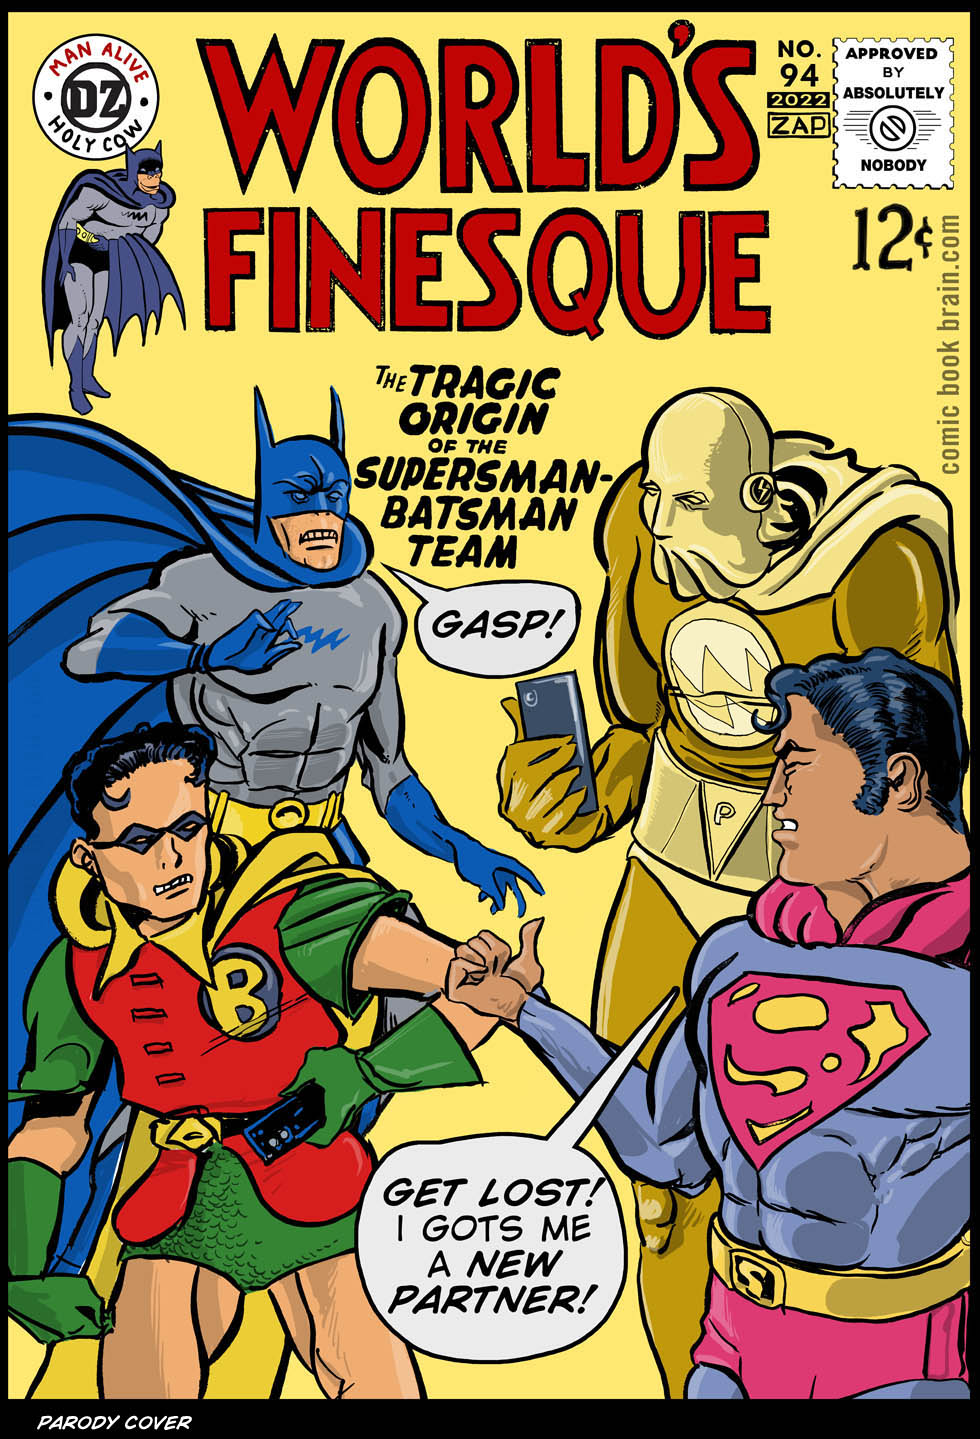 Worlds Finesque 94 Origin of the Bats and Supers Team by Blob Kane